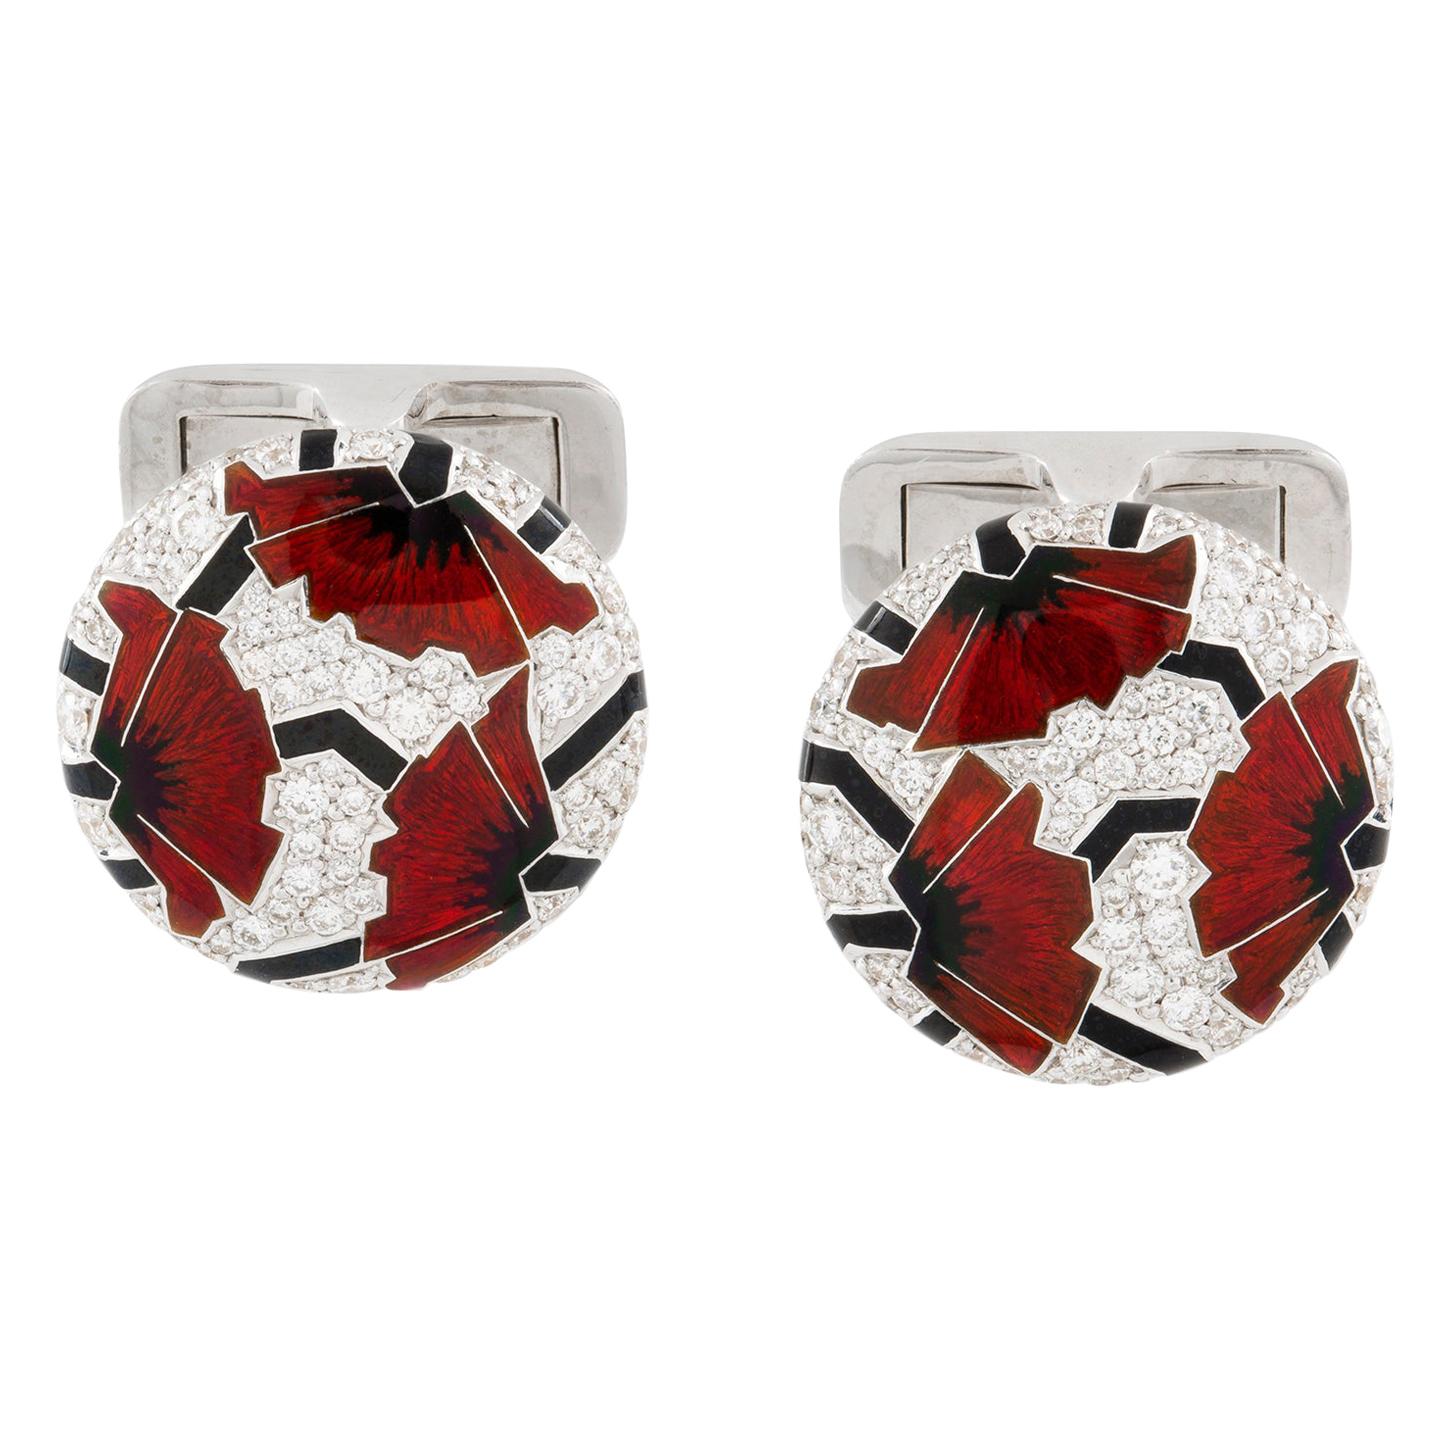 Pair of Red Poppies Art Deco Style Cufflinks by Ilgiz F For Sale